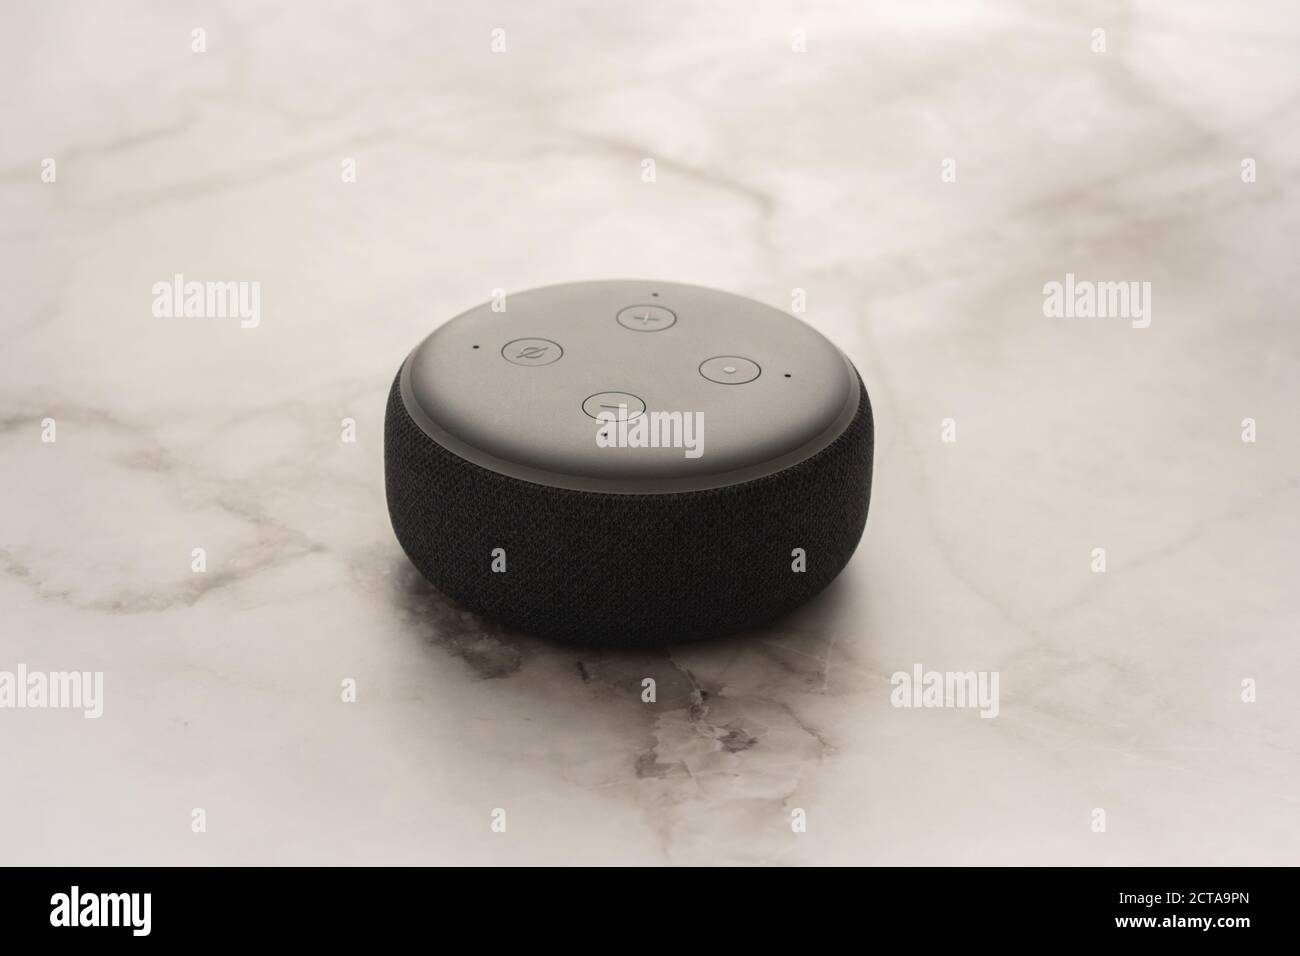 LONDON, UNITED KINGDOM - SEPTEMBER 20 2020: Close-up of an Amazon Echo Dot, the virtual assistant speaker, with a light marble effect background. Stock Photo